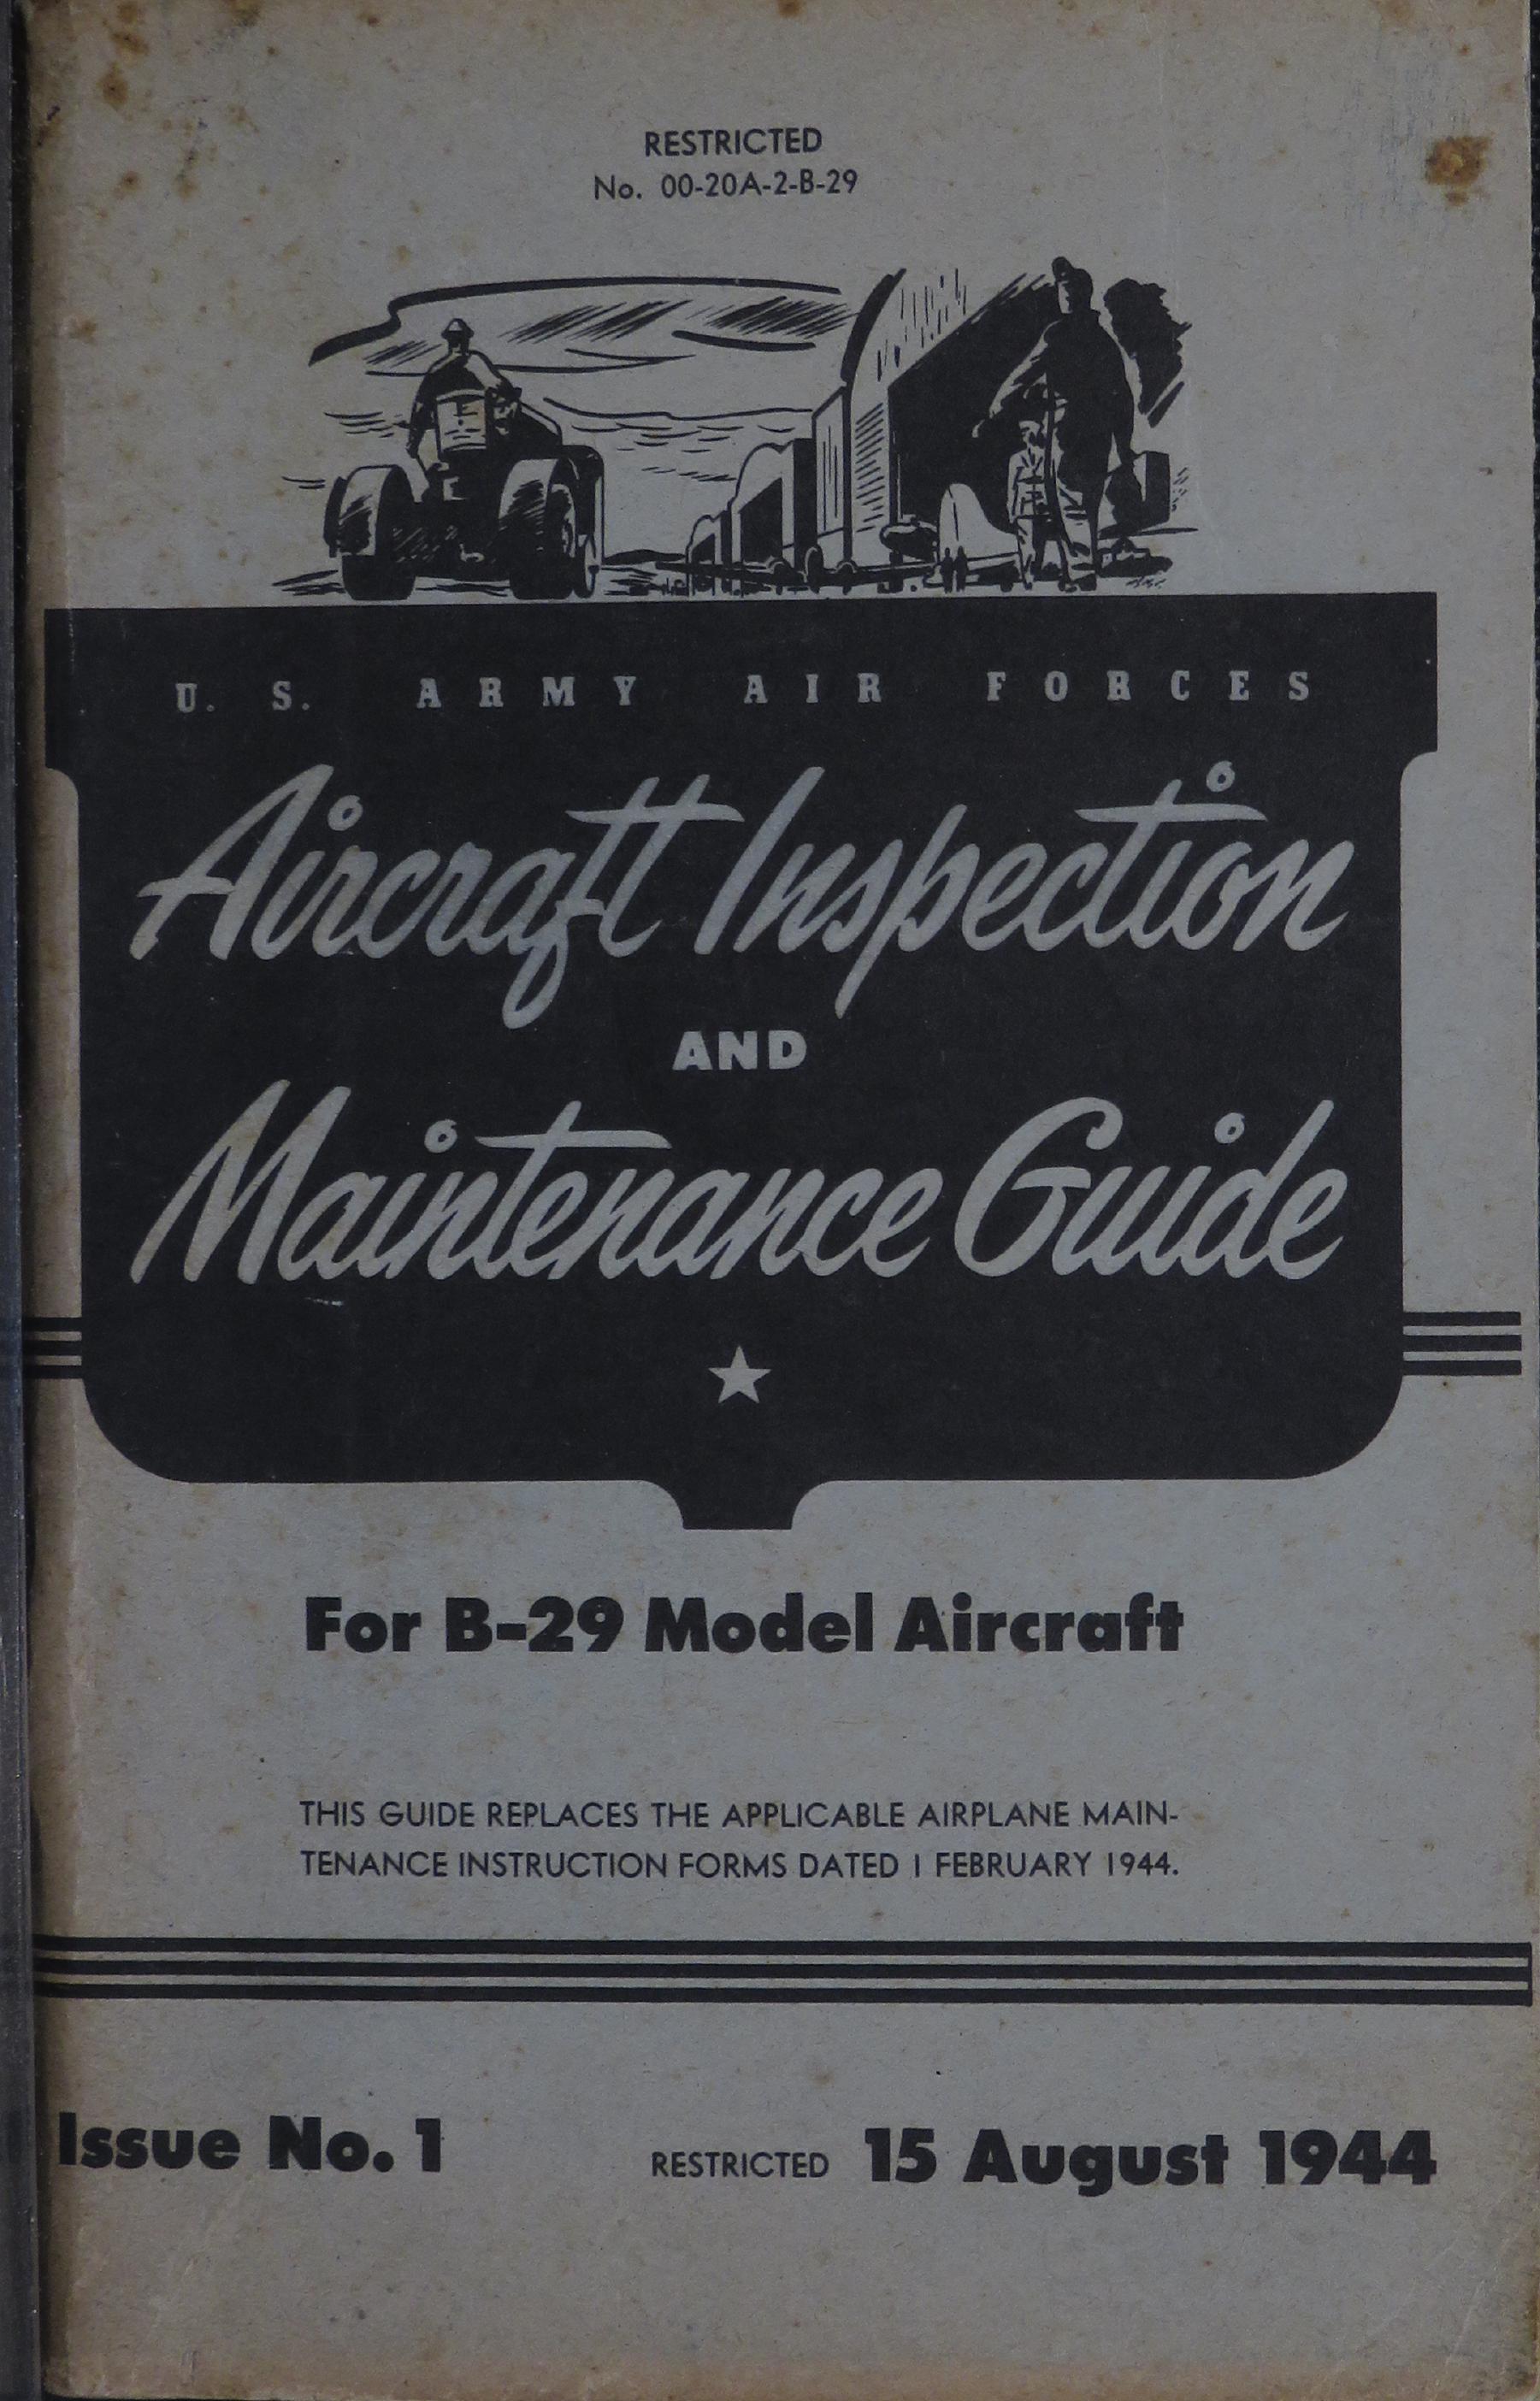 Sample page 1 from AirCorps Library document: Aircraft Inspection and Maintenance Guide for B-29 Aircraft